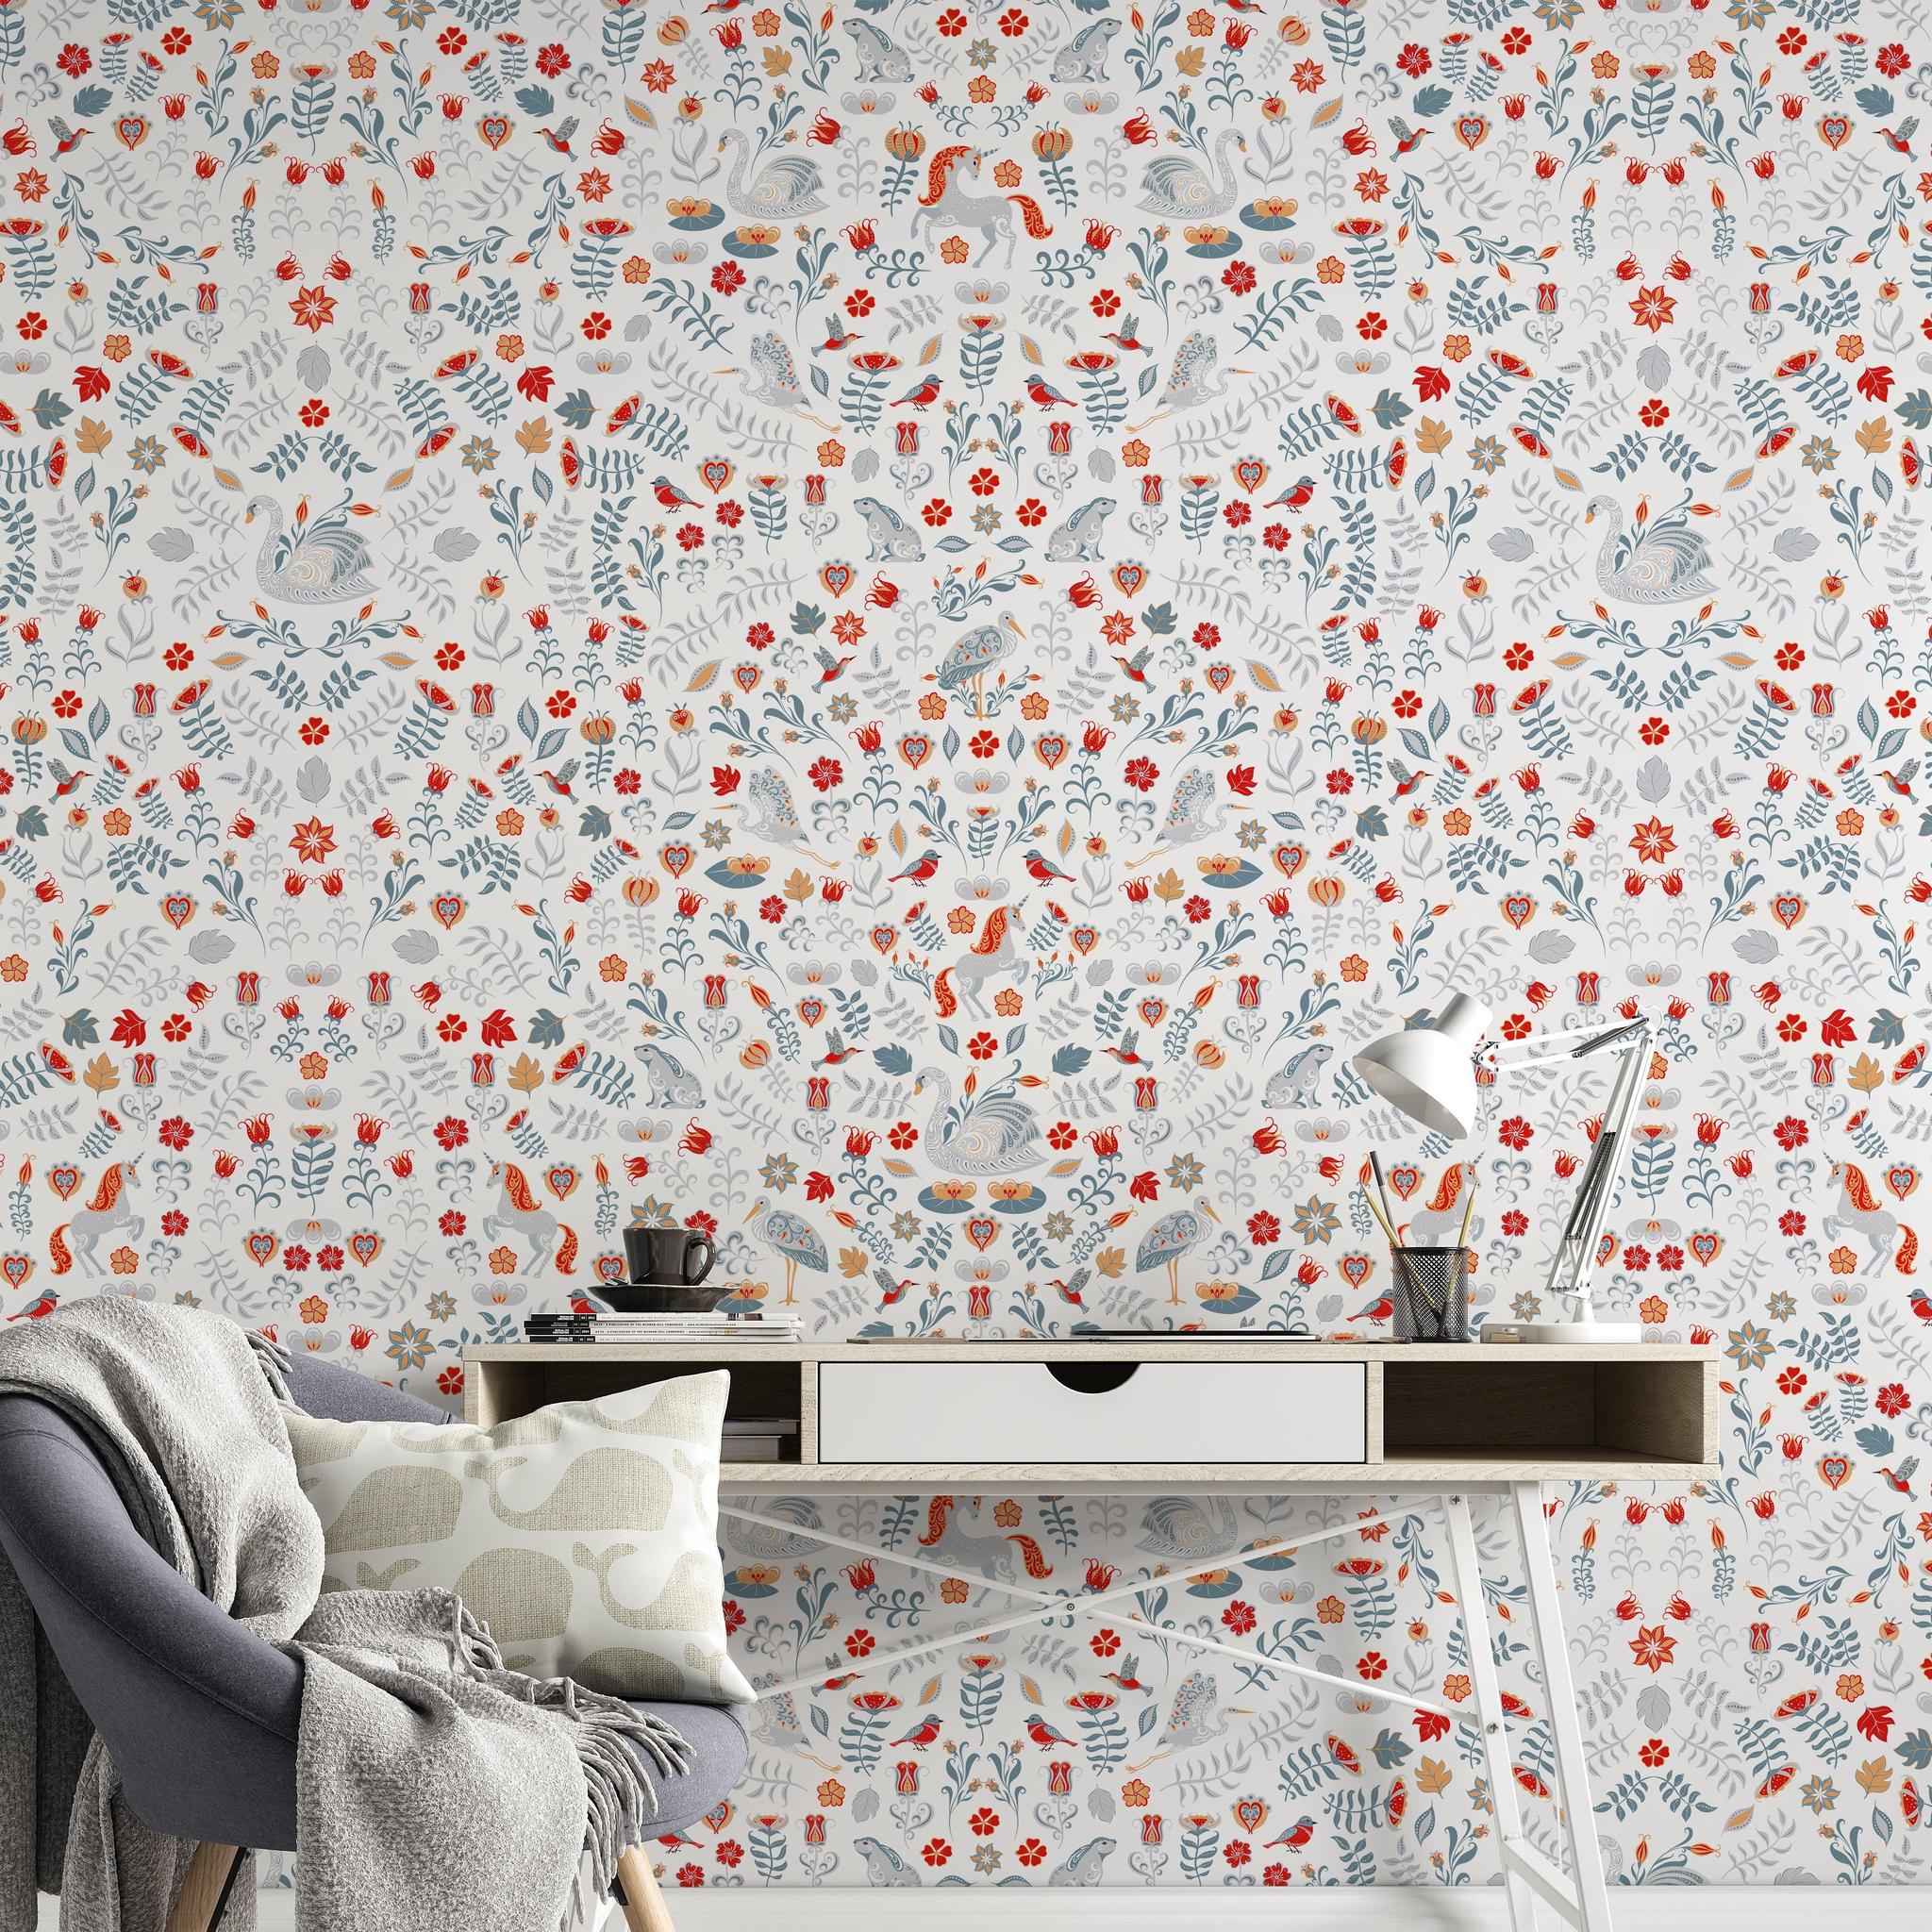 Storybook Wallpaper by Wall Blush SG02, featuring whimsical patterns in a cozy home office.
